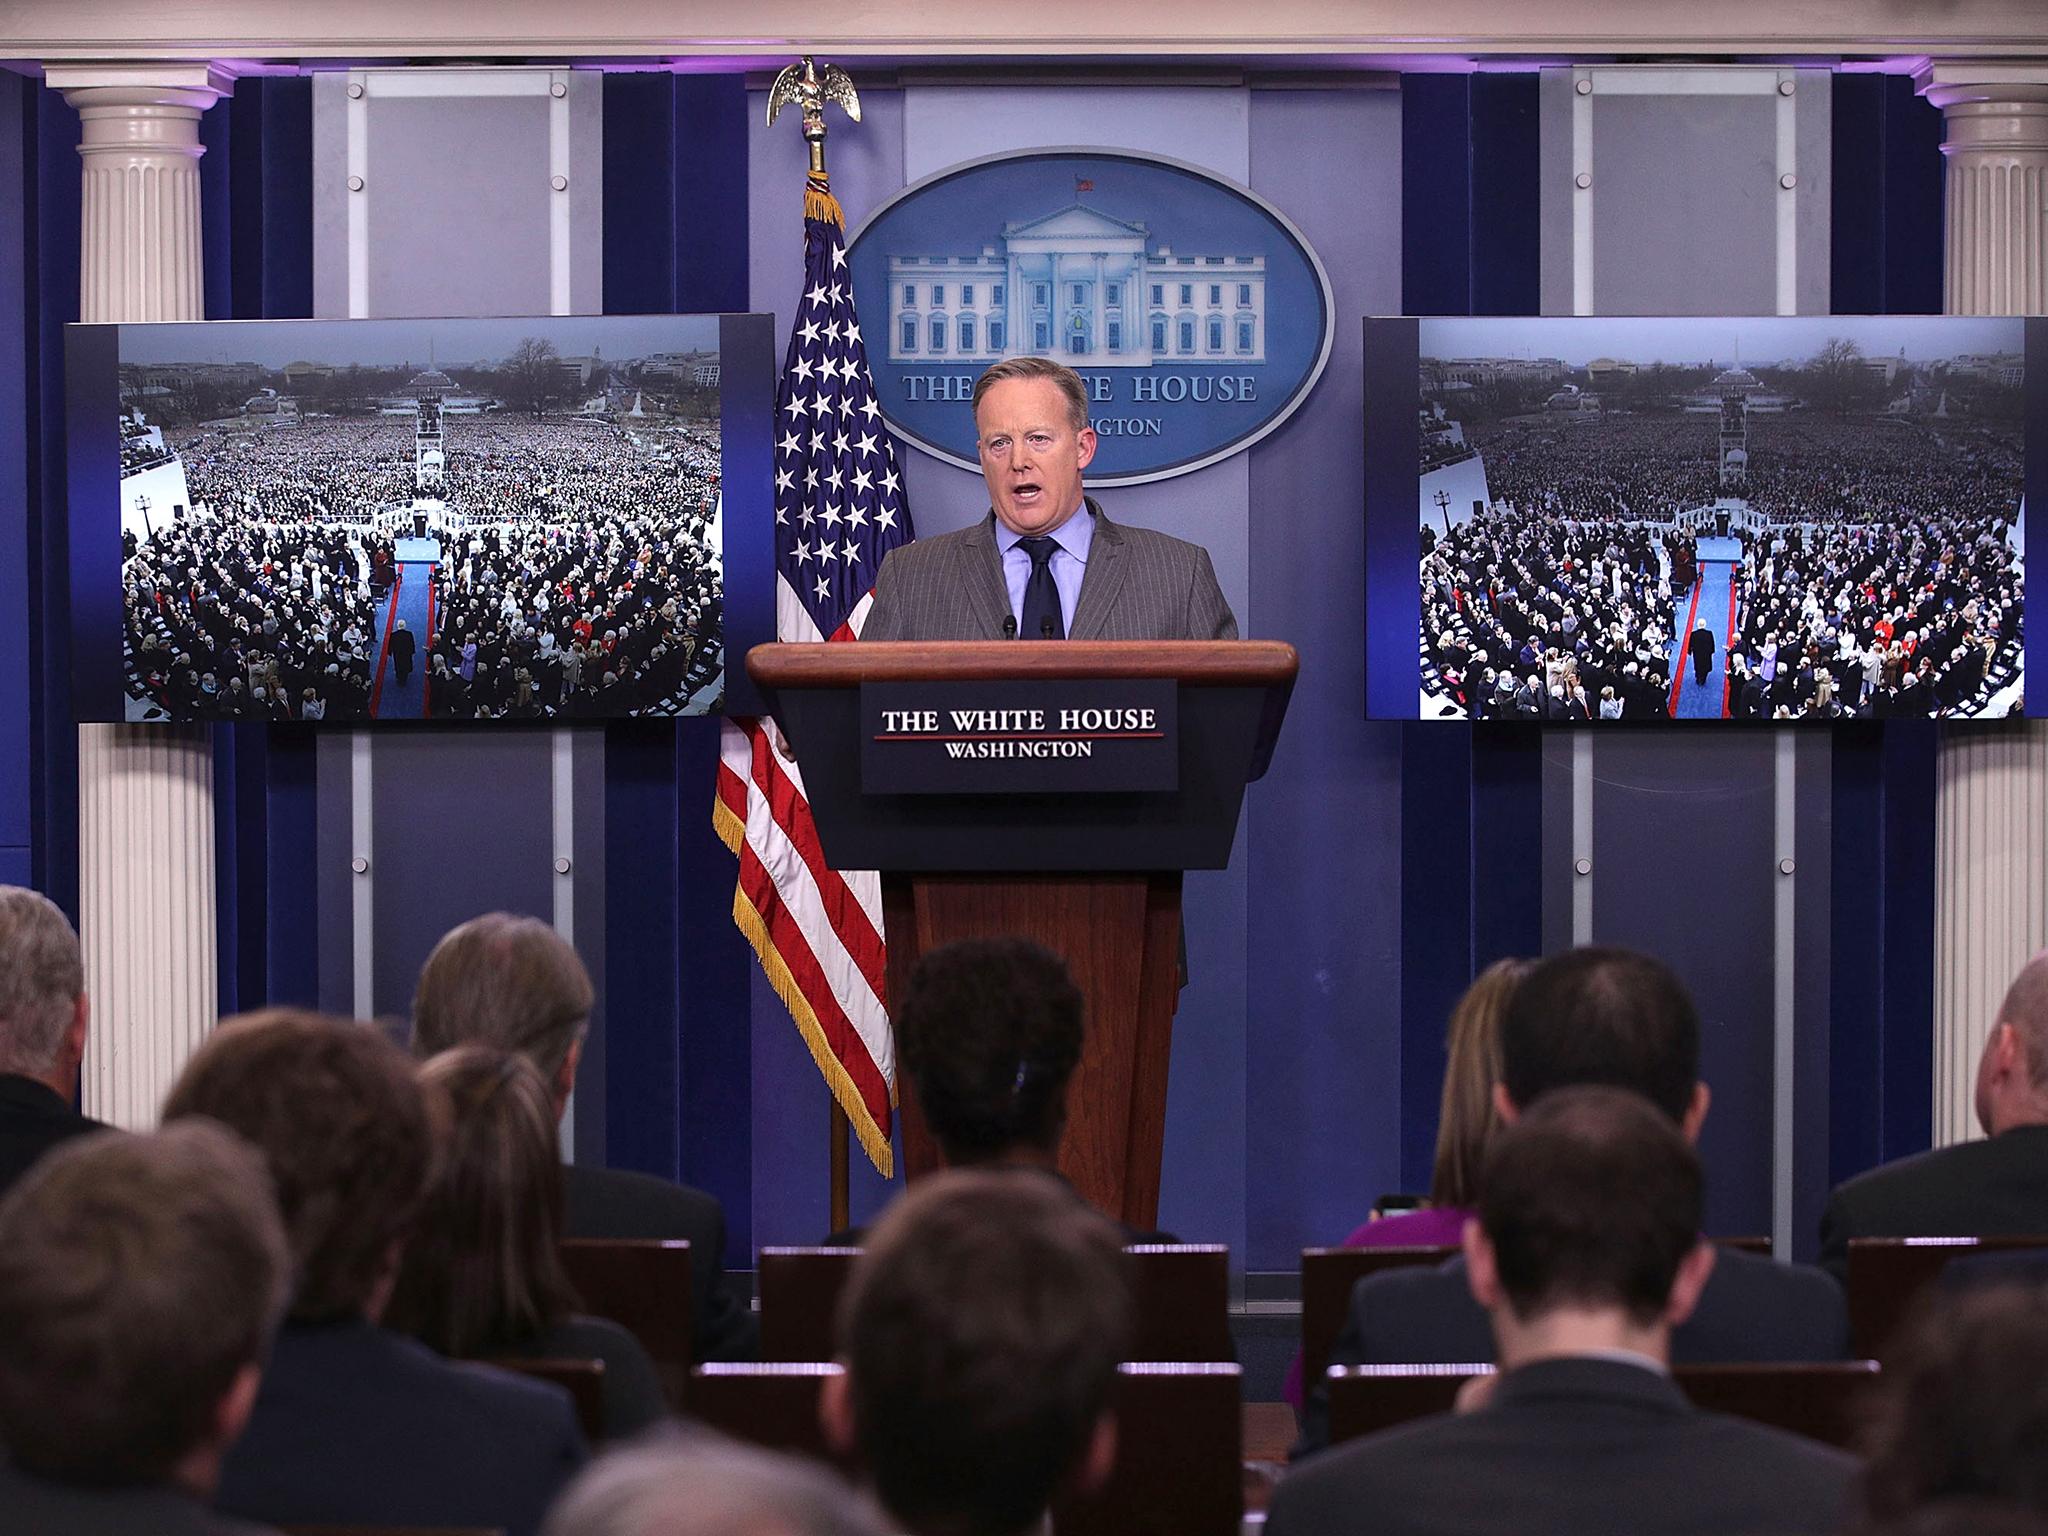 Sean Spicer's first press conference as Press Secretary where he spoke about the media's reporting on the inauguration's crowd size